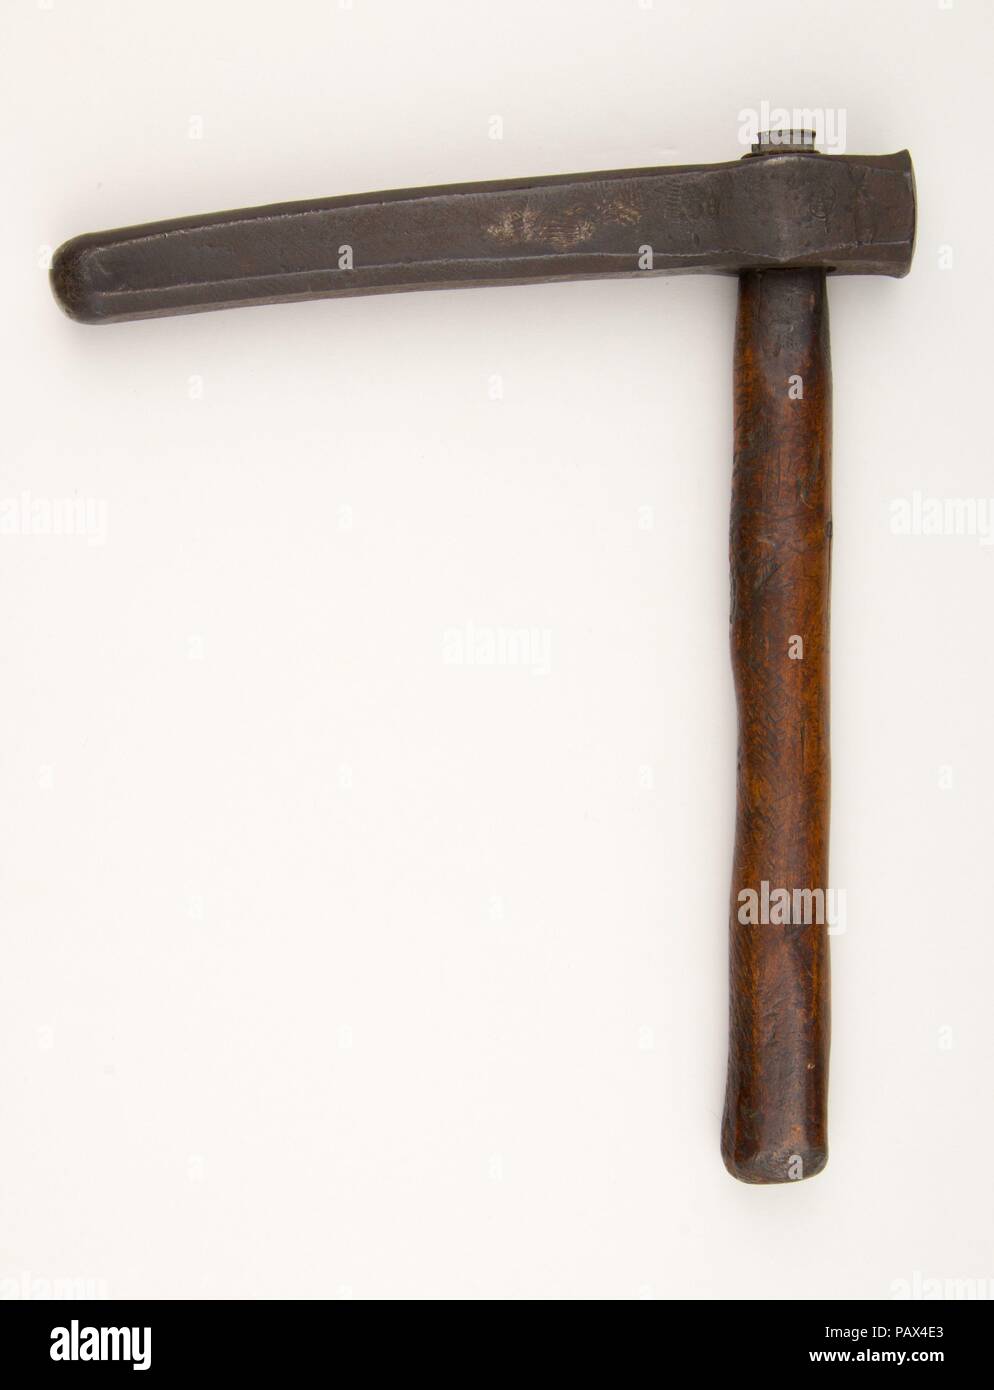 Armorer's Hammer. Culture: German or French. Dimensions: H. 12 5/8 in.  (32.1 cm); W. of head. 10 1/4 in. (26 cm); Wt. 3 lb. 15.7 oz. (1805.9 g).  Date: 18th-19th century. This